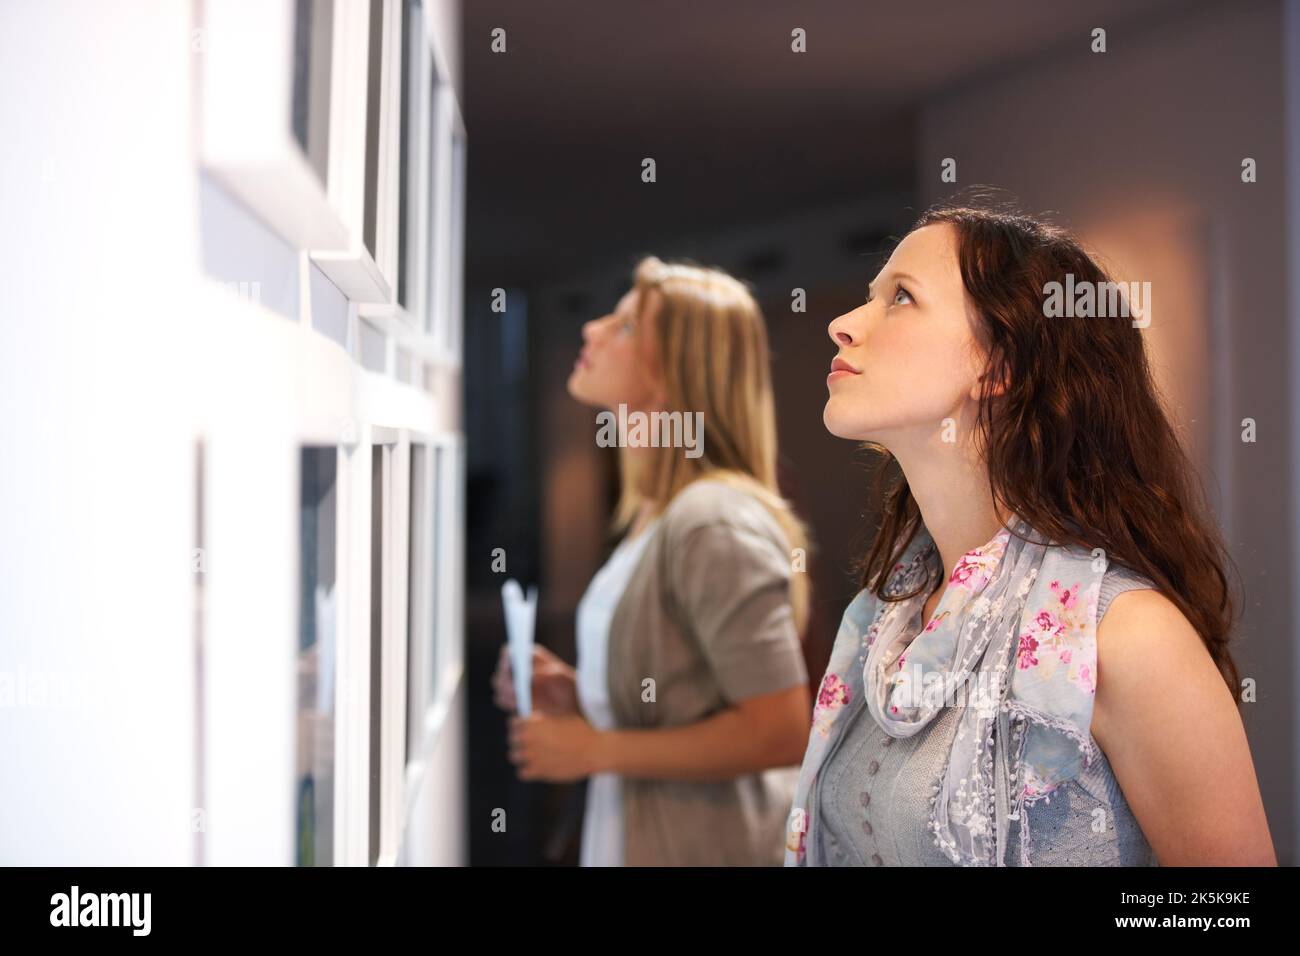 Closely examining the elements of a painting. Two female friends closely scrutinizing a painting at an exhibition. Stock Photo